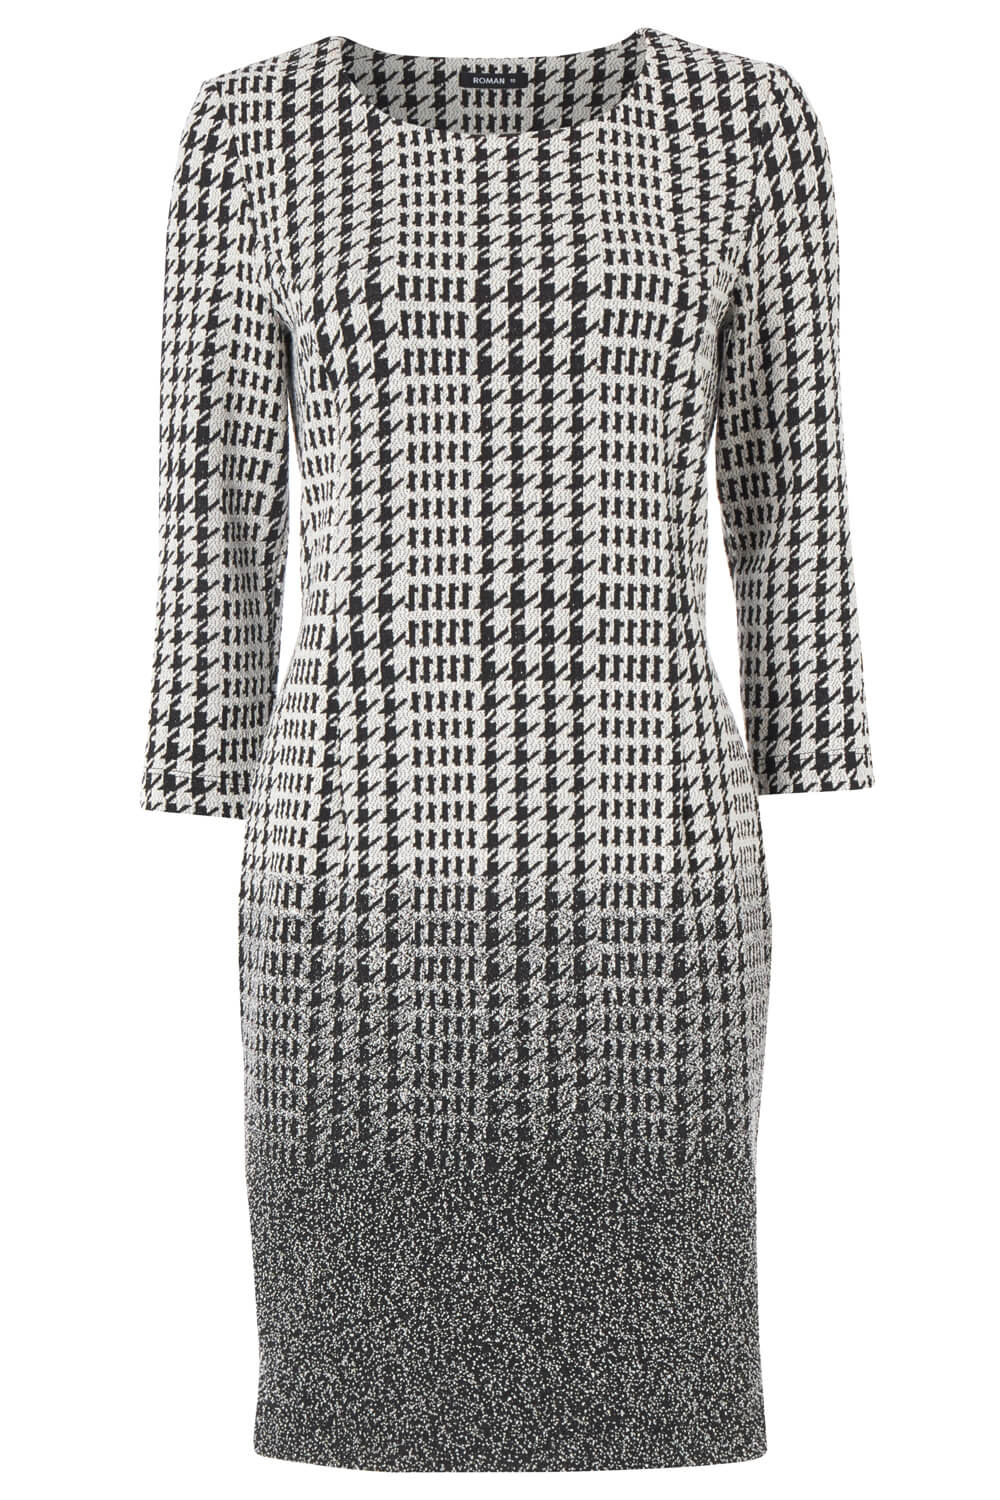 Black Dogtooth Check Ombre Textured Shift Dress, Image 5 of 5